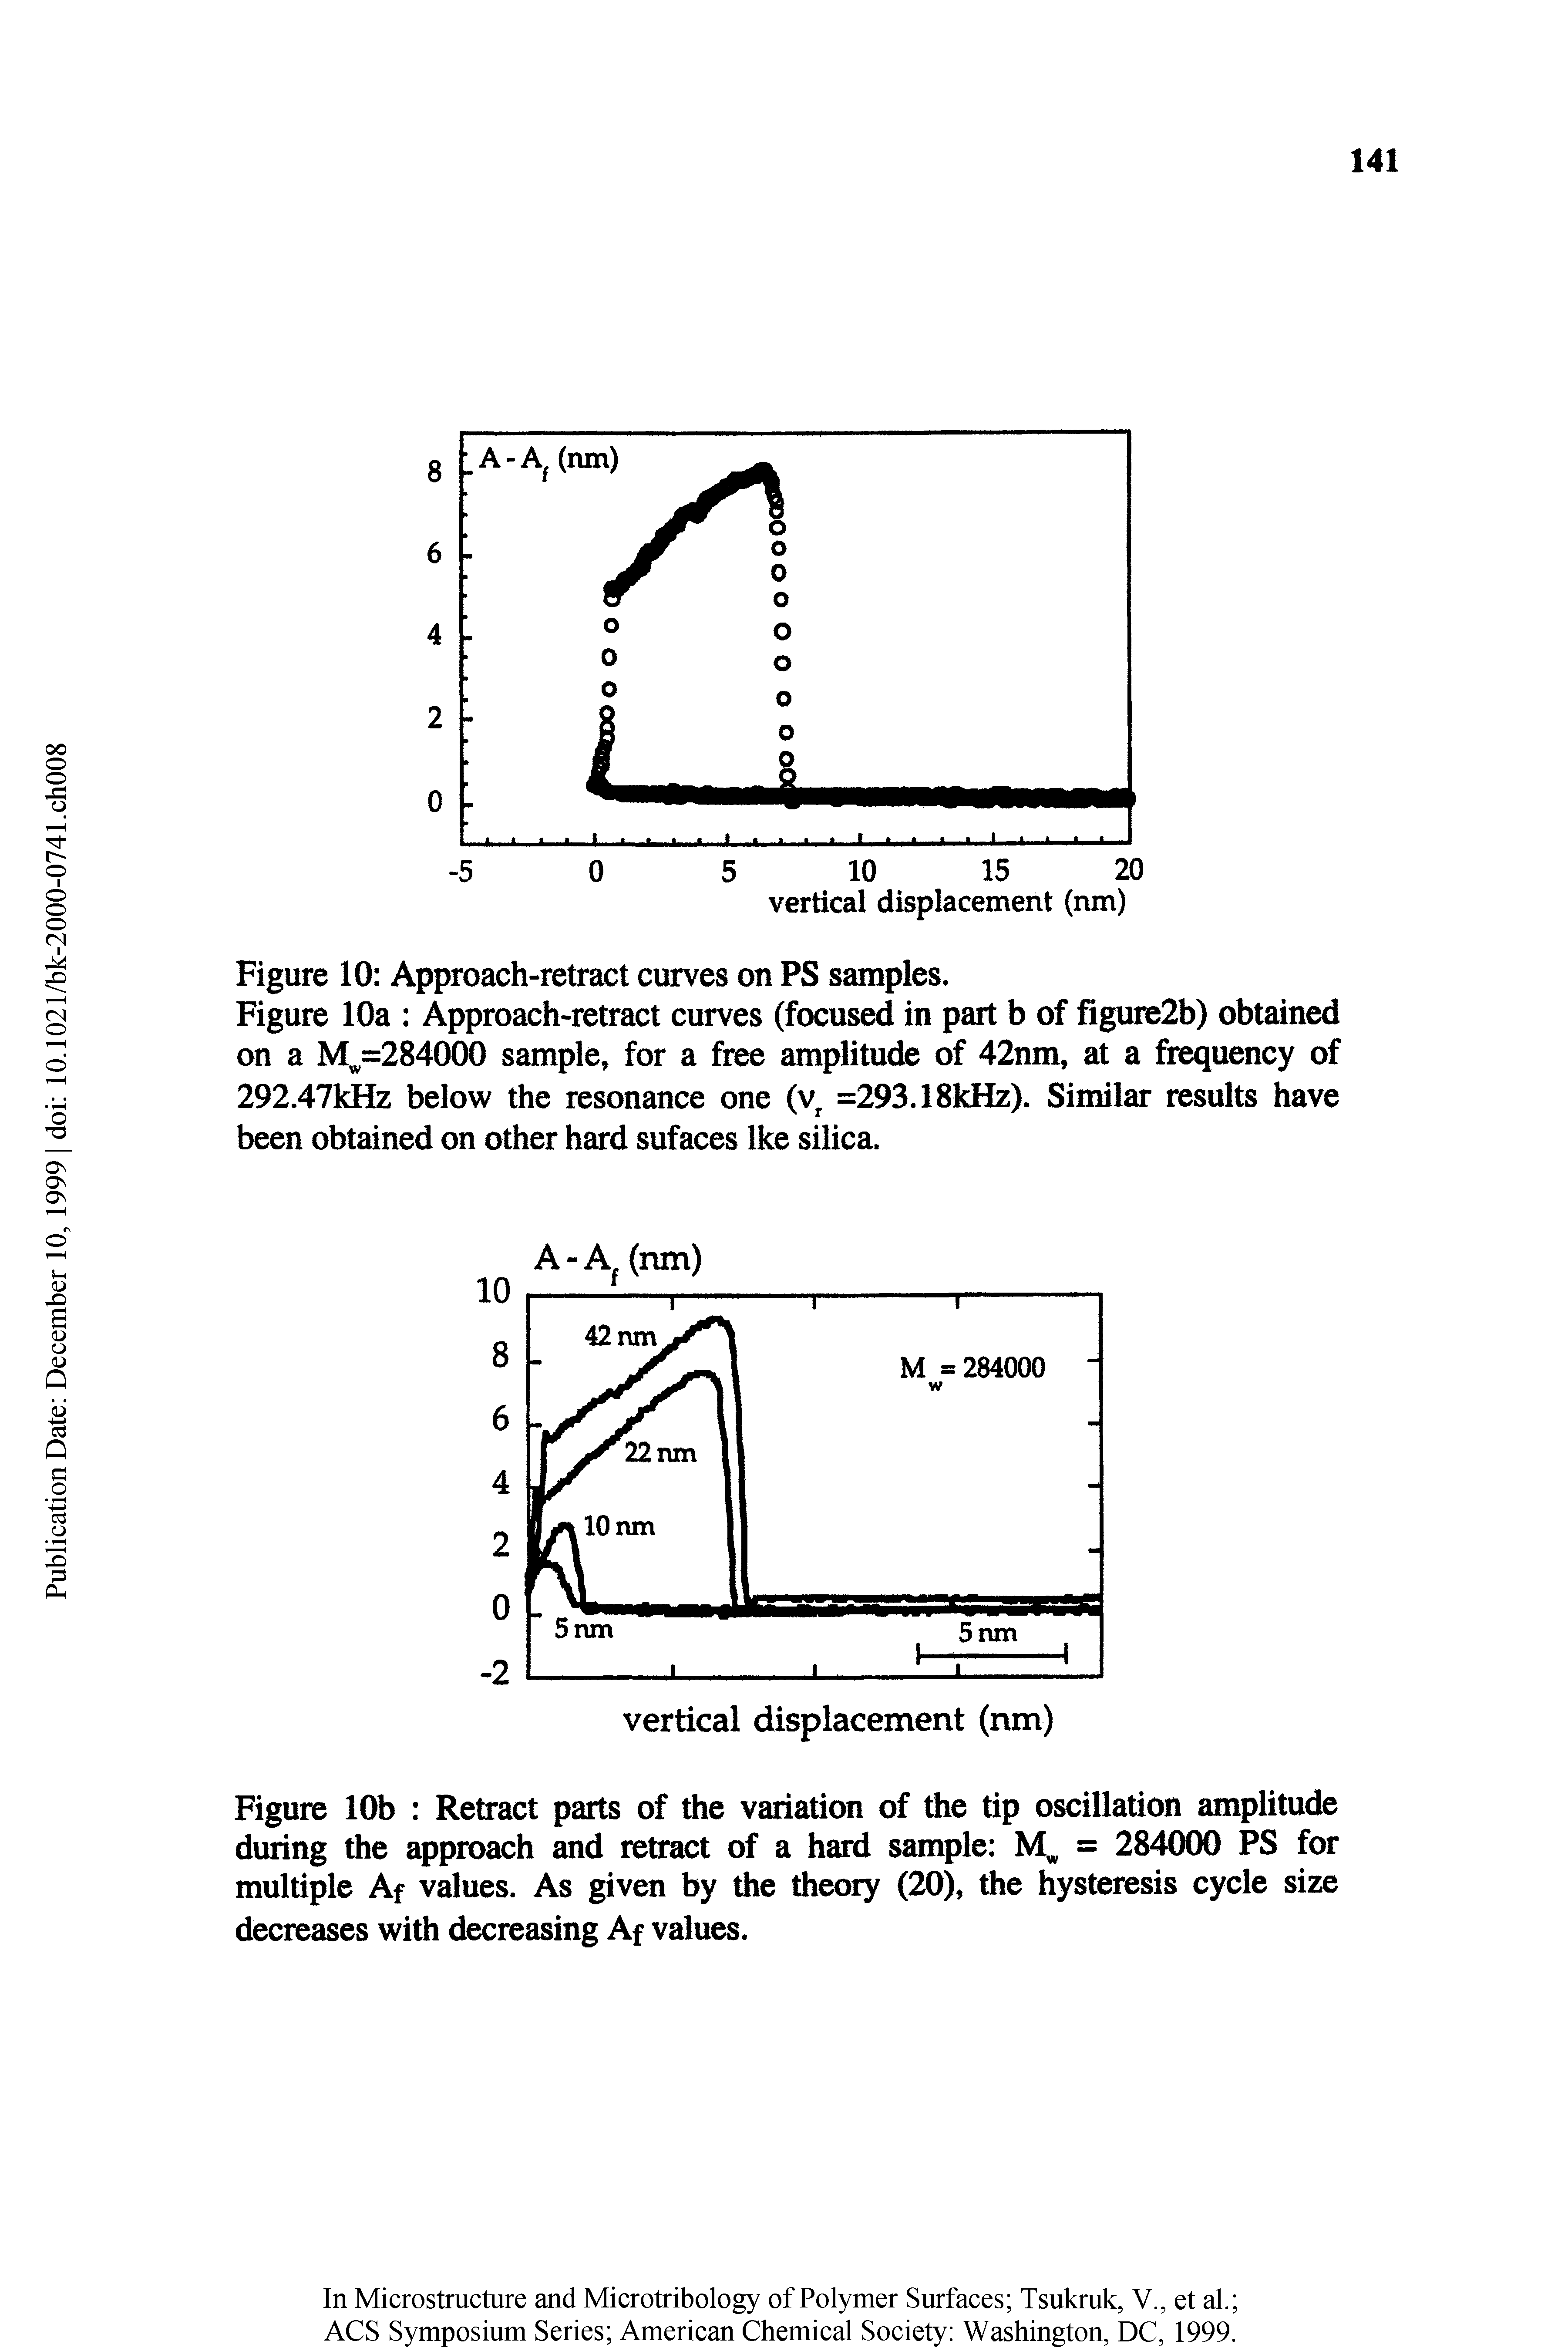 Figure 10a Approach-retract curves (focused in part b of figure2b) obtained on a M =2840(K) sample, for a free amplitude of 42nm, at a frequency of 292.47kHz below the resonance one (v =293.18kHz). Similar results have been obtained on other hard sufaces Ike silica.